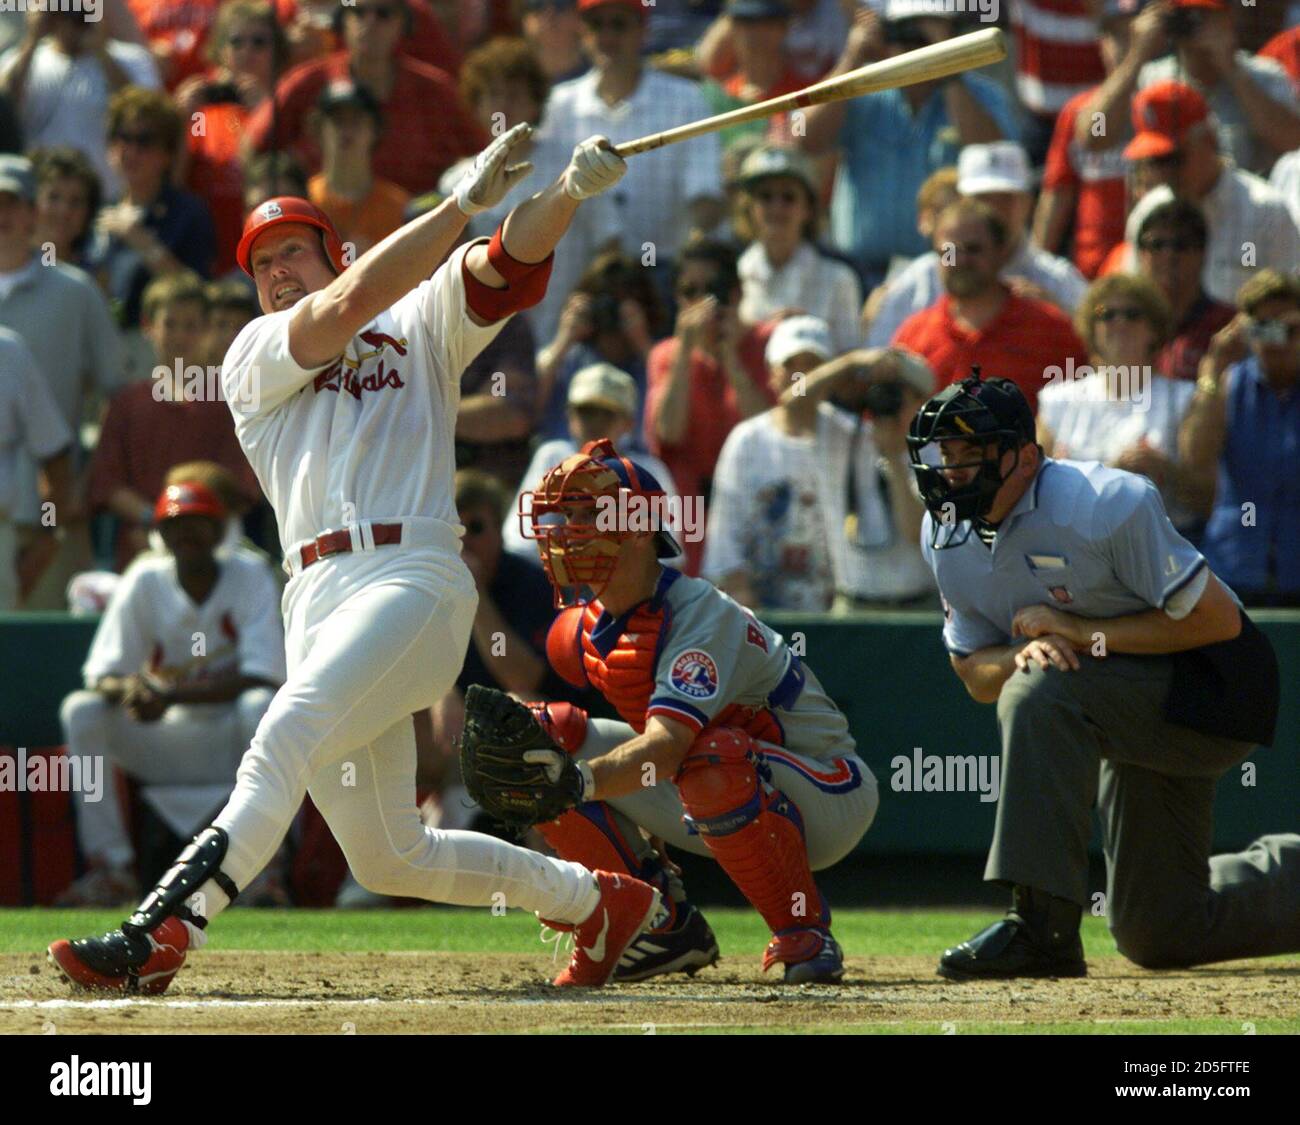 Udholdenhed Fortolke tåbelig St. Louis Cardinals Mark McGwire hits his 69th home run of the year in  front of Montreal Expos catcher Michael Barrett and umpire Rich Rieker in  the third inning of their game